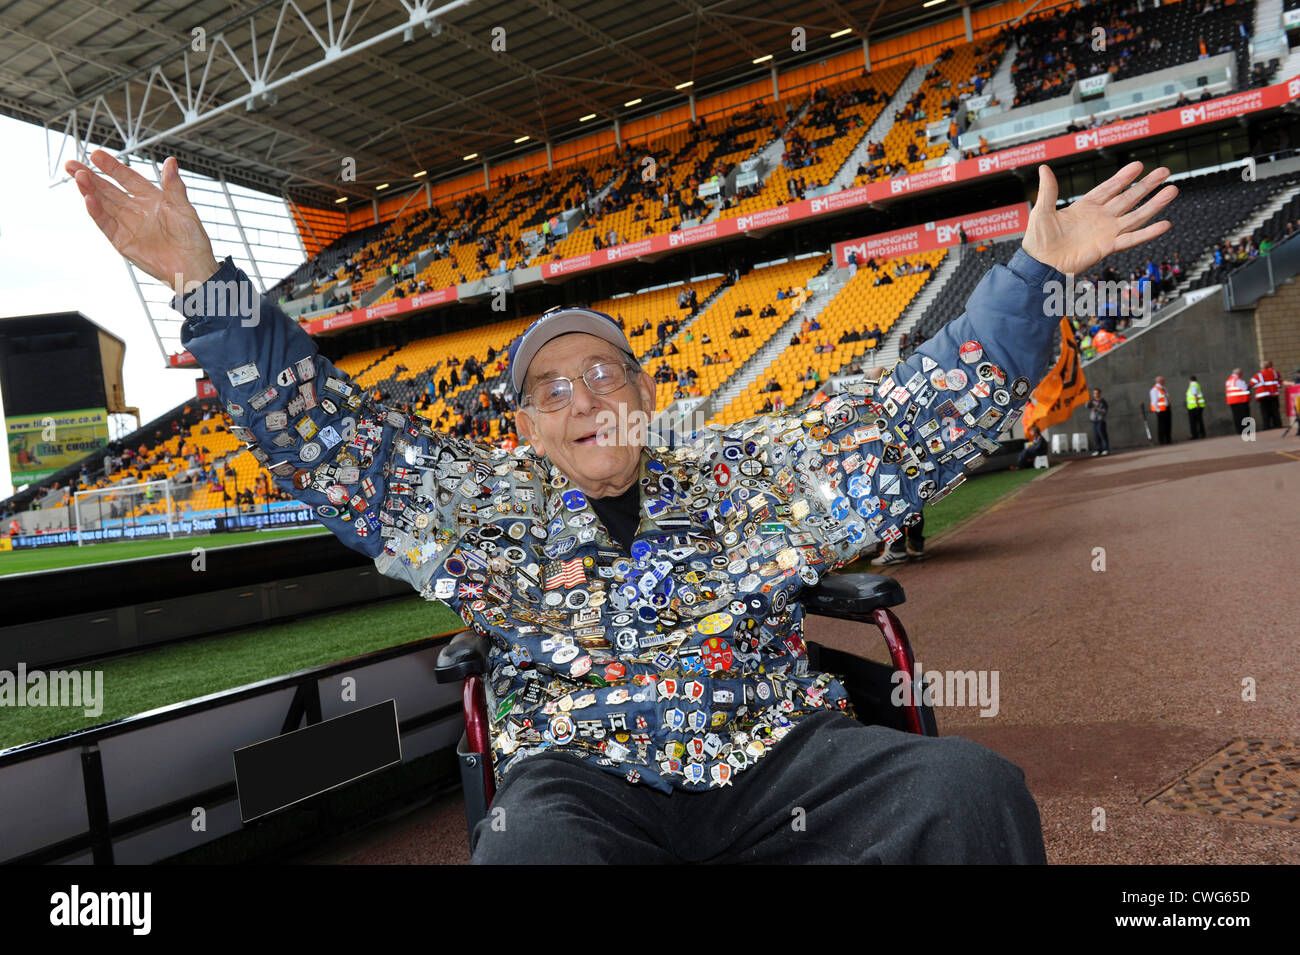 Derby County football fan 87 year old Douglas Else with over 500 Derby badges on his jacket. Stock Photo